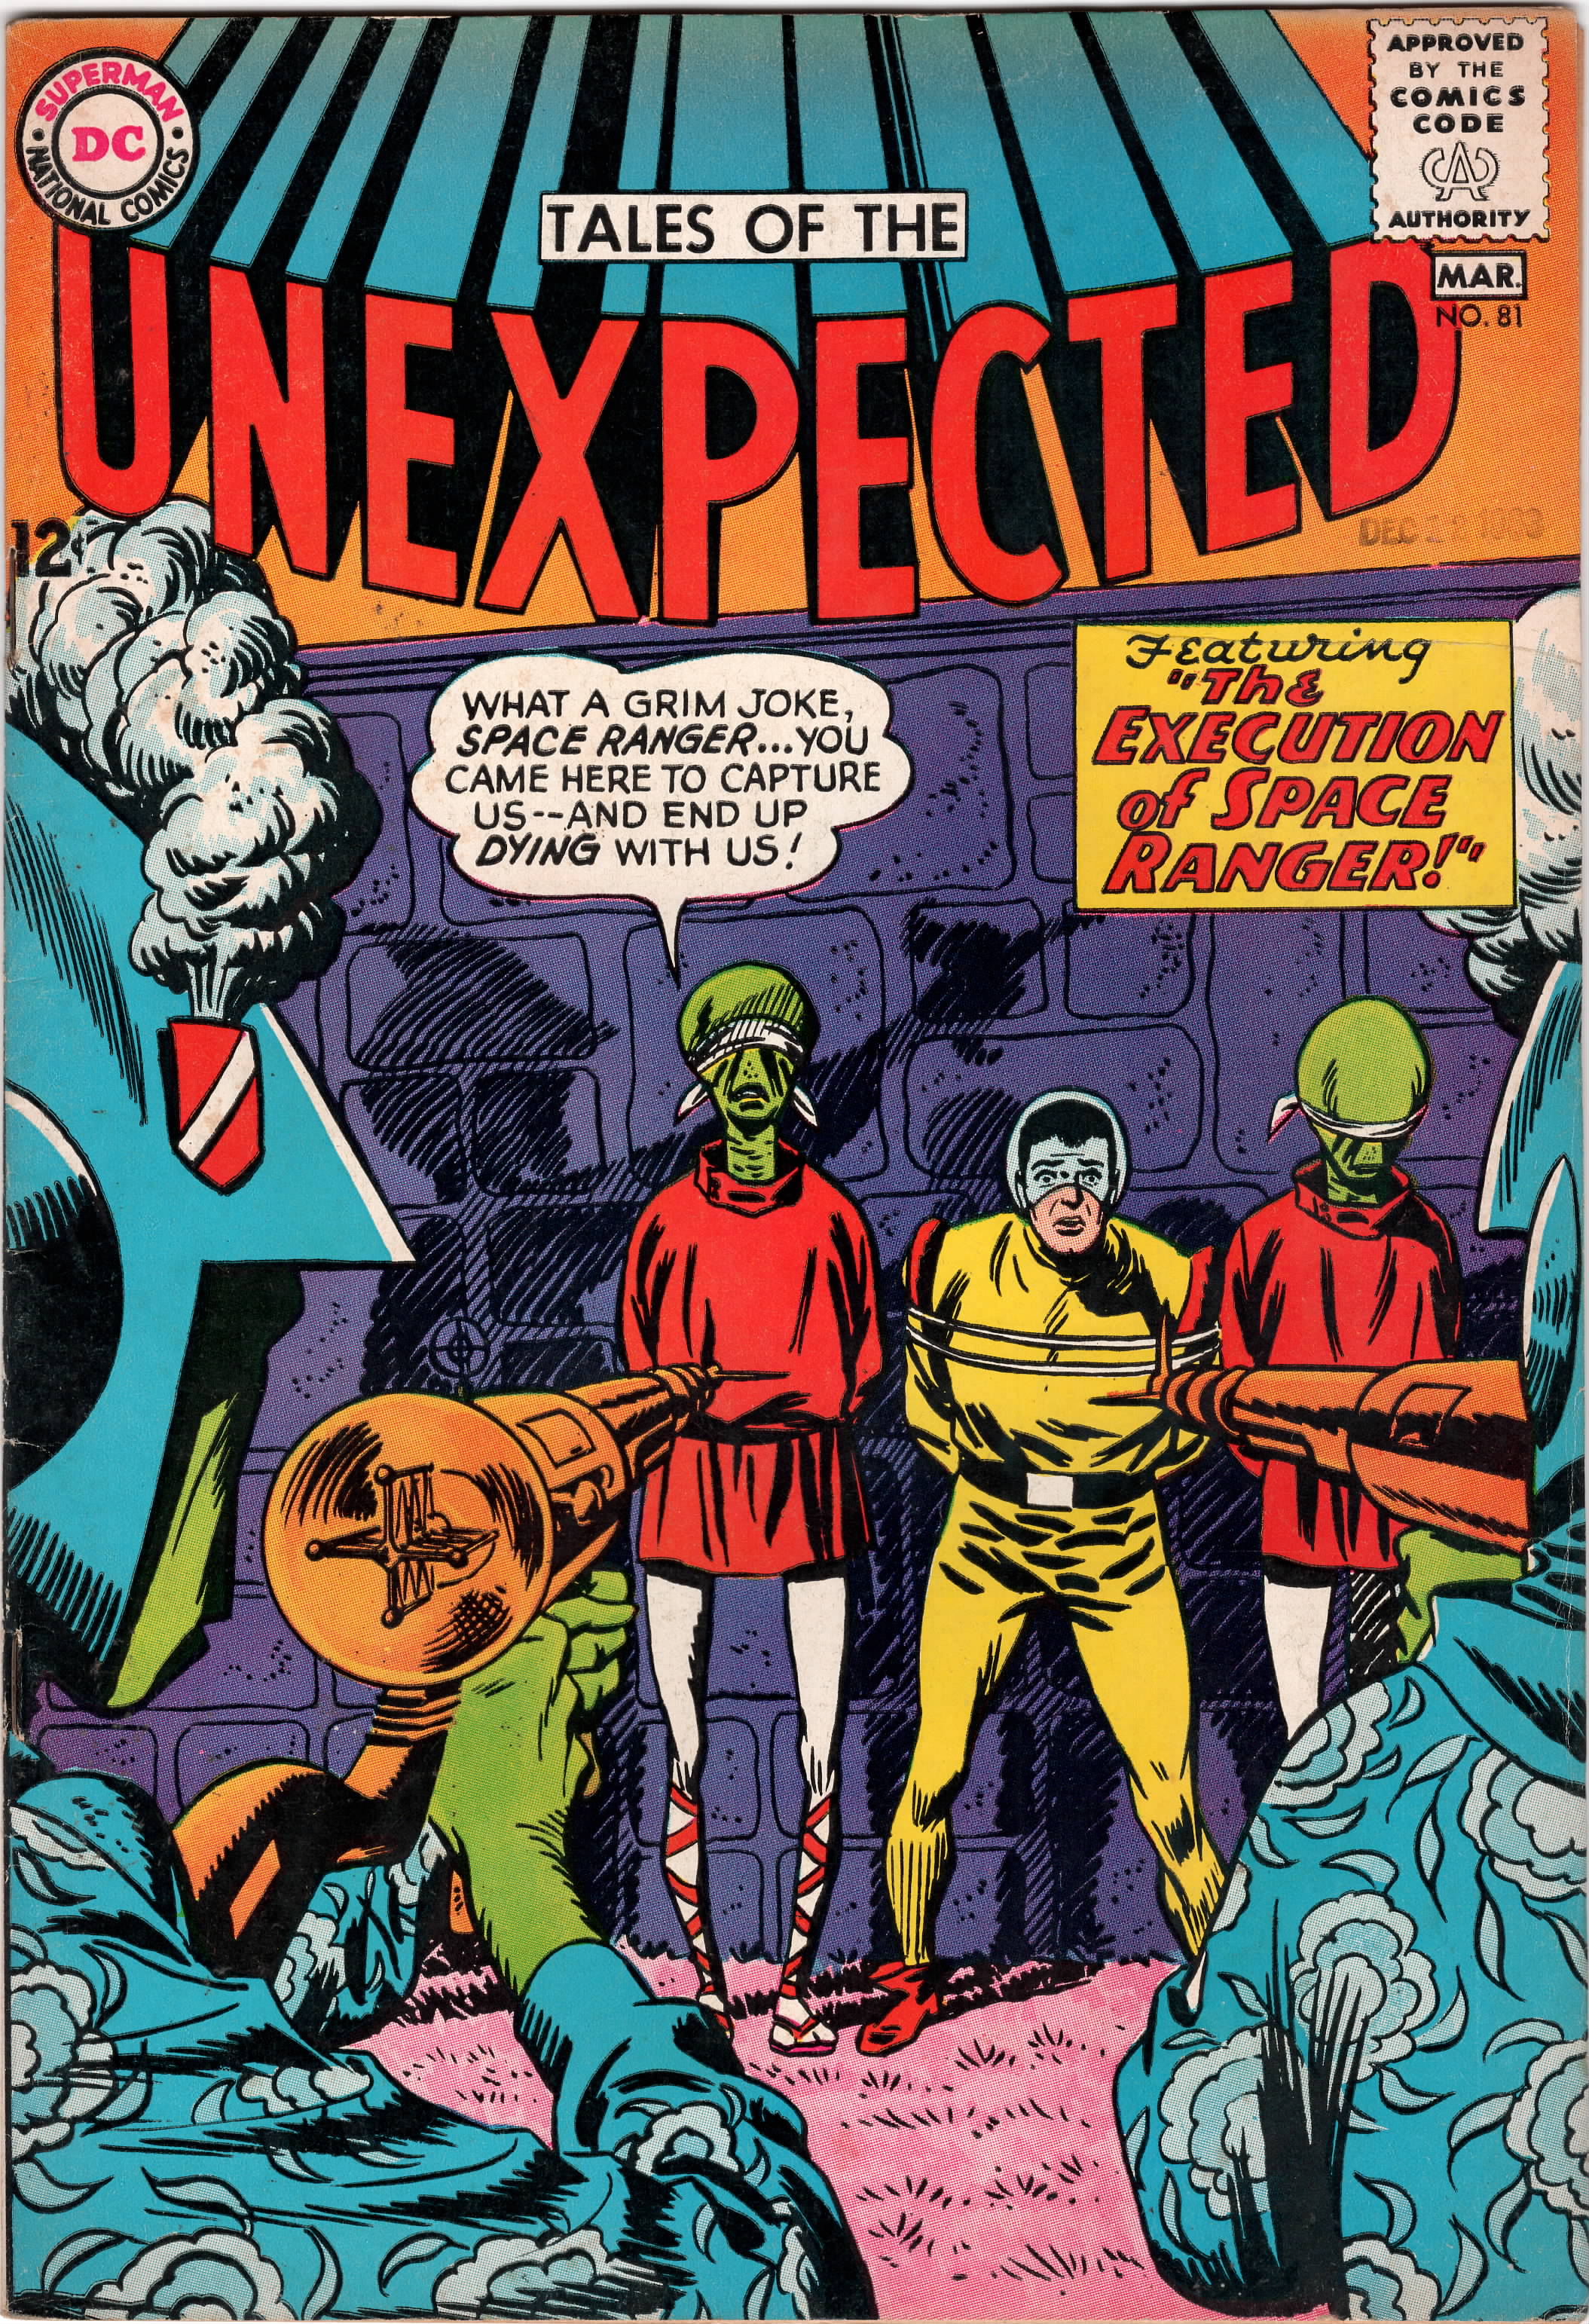 Tales of The Unexpected #081